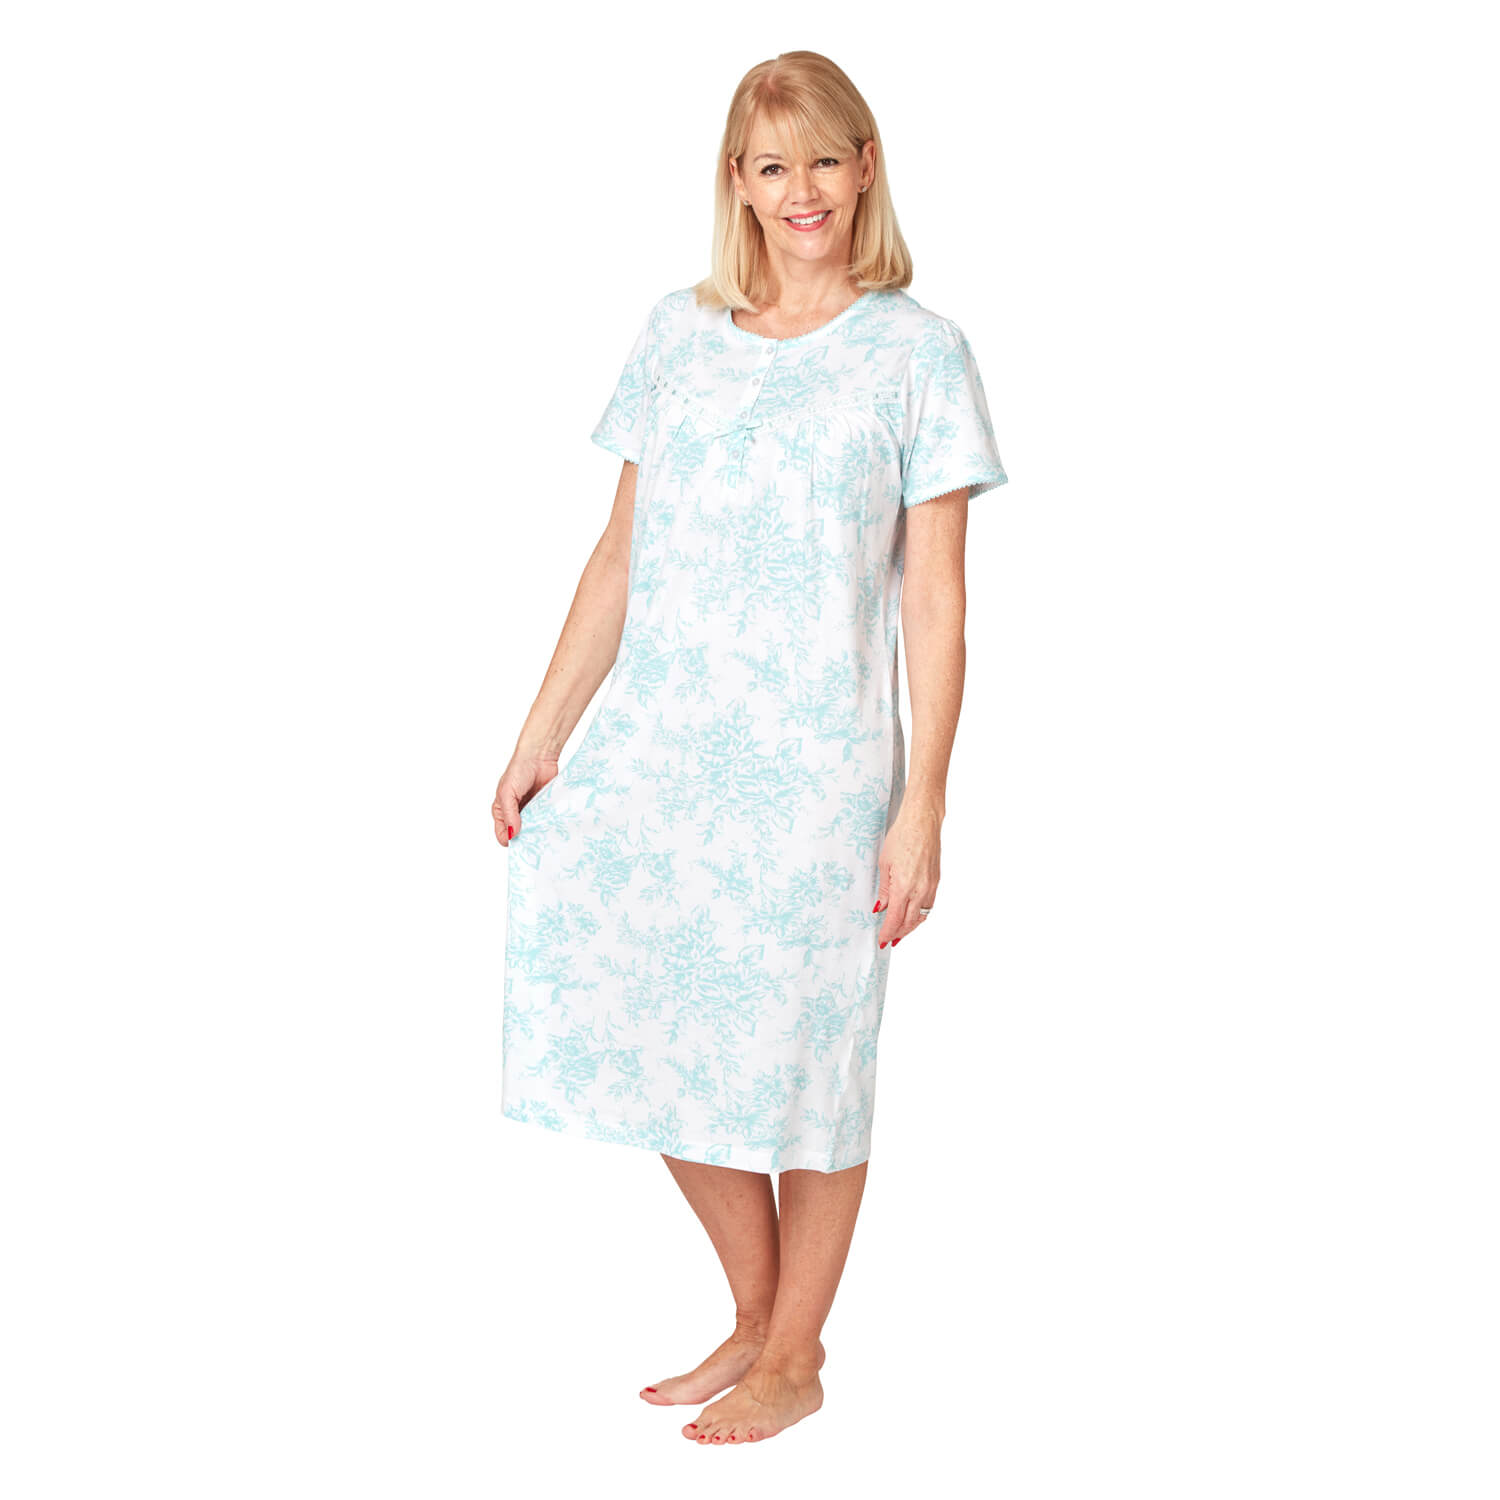 Marlon Agnes Floral Short-Sleeve Nightdress - Blue 1 Shaws Department Stores